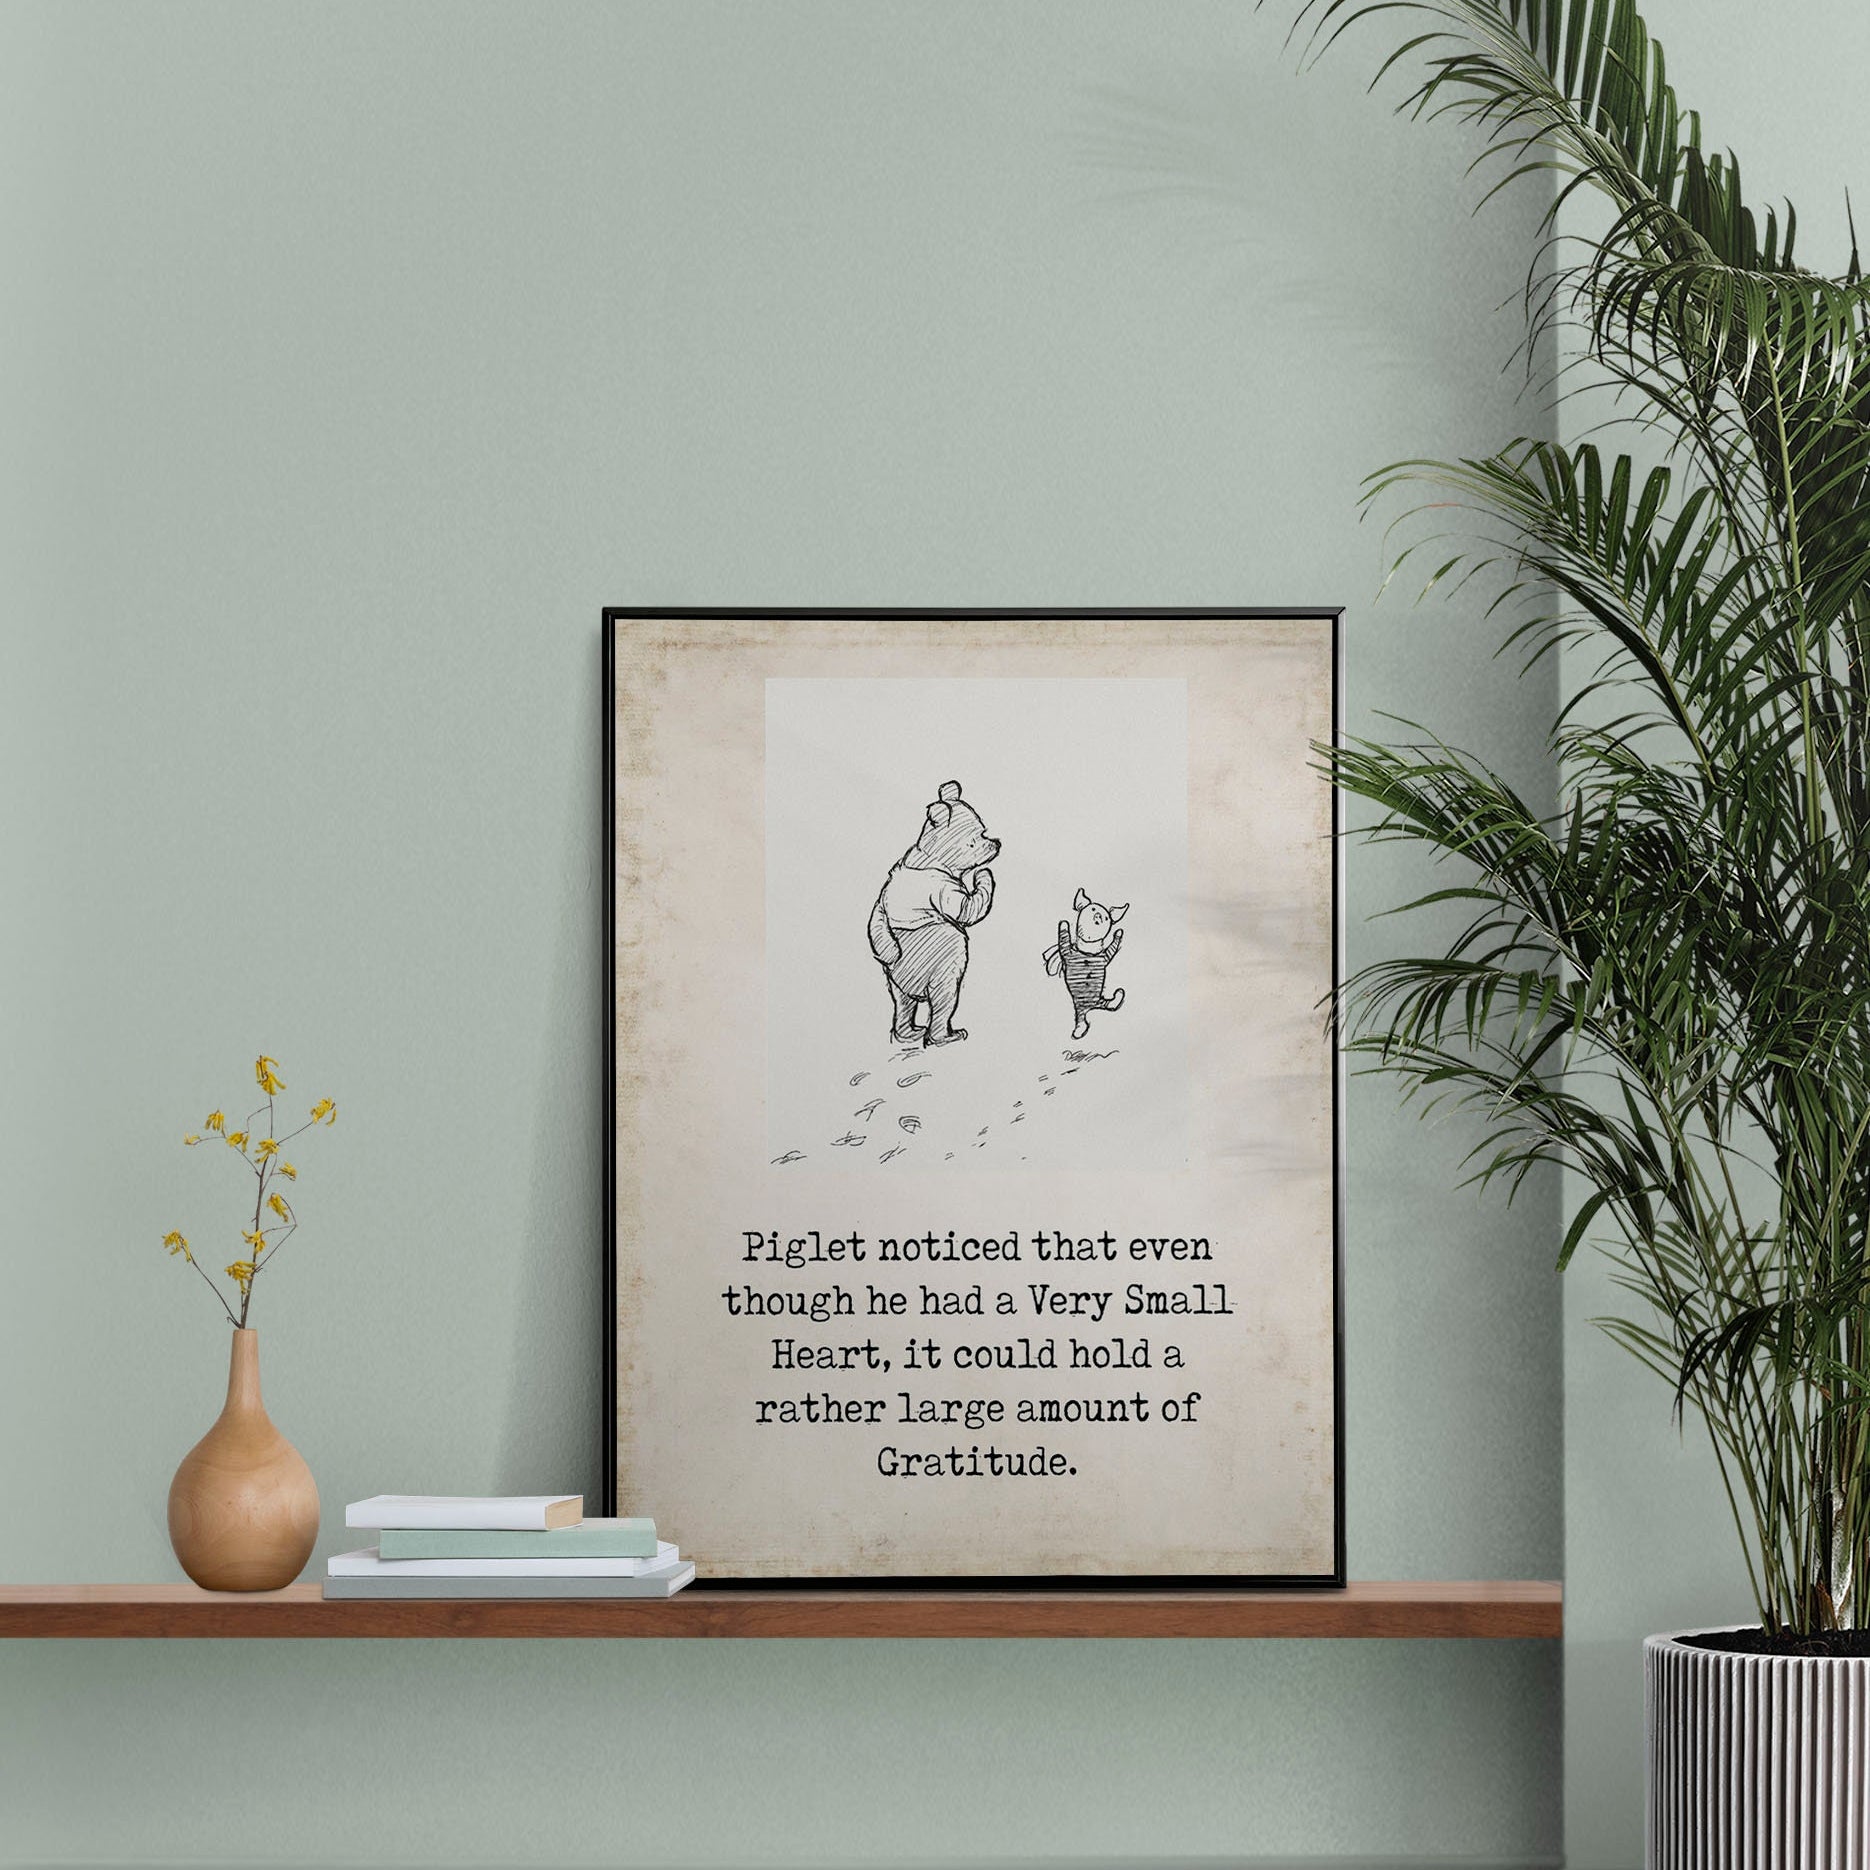 Piglet Gratitude Quote Winnie the Pooh Unframed or Framed Nursery Wall Art Prints in Vintage Style with Pooh & Piglet Drawing, AA Milne